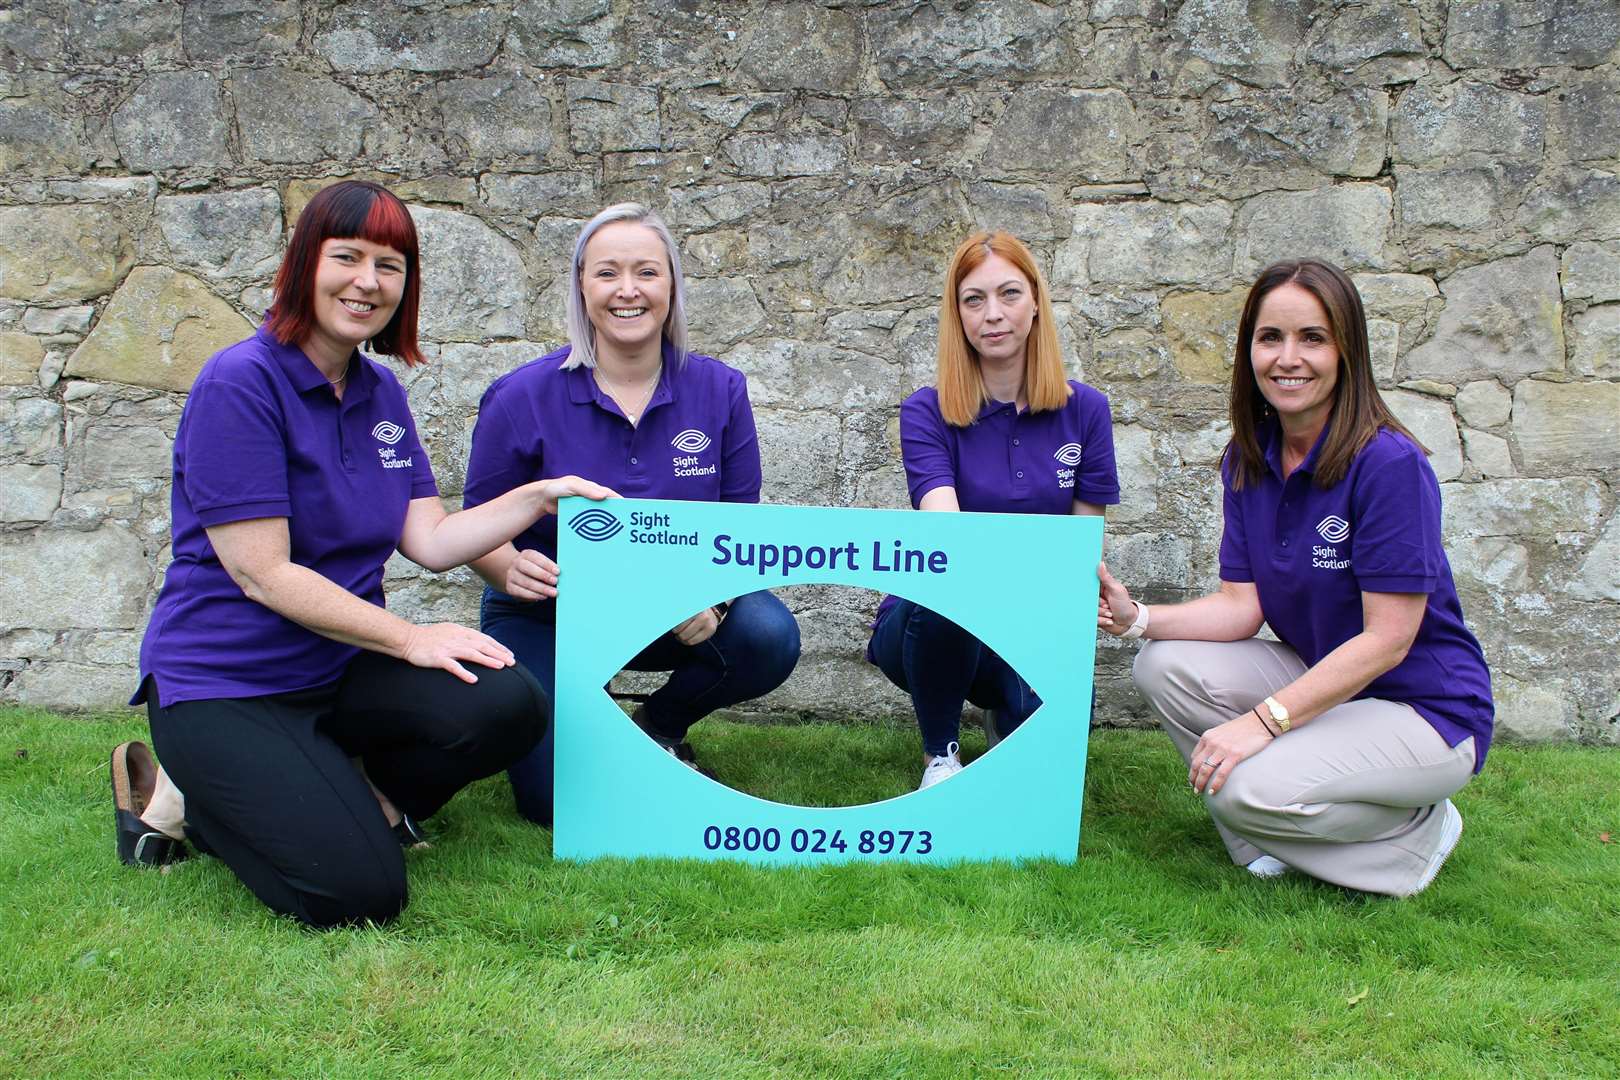 The new helpline will be run by staff from Sight Scotland's Family Wellbeing Service.